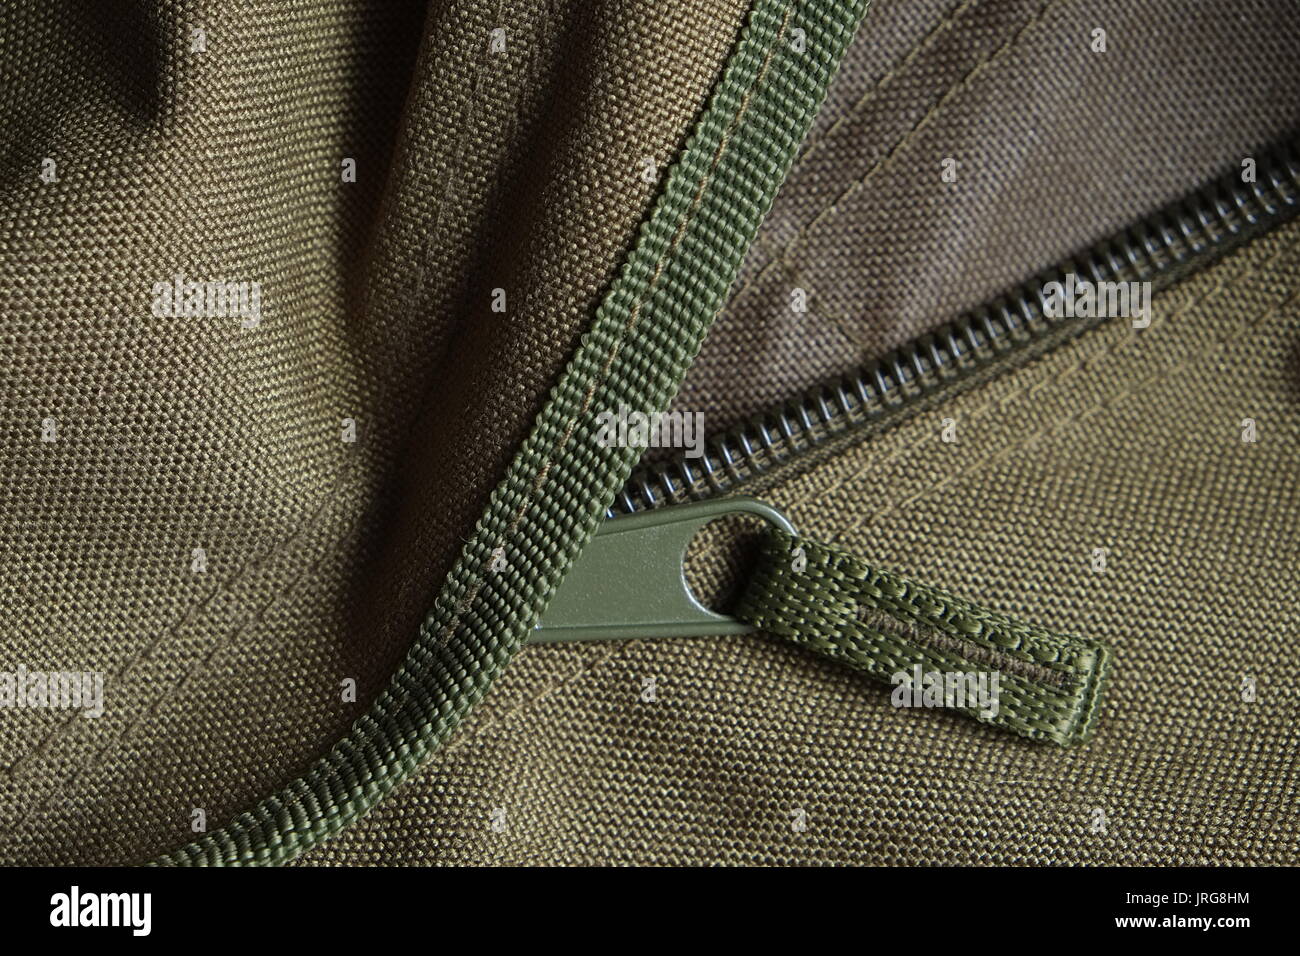 Detail of a tactical holdall army bag, showing canvas and zipper Stock Photo